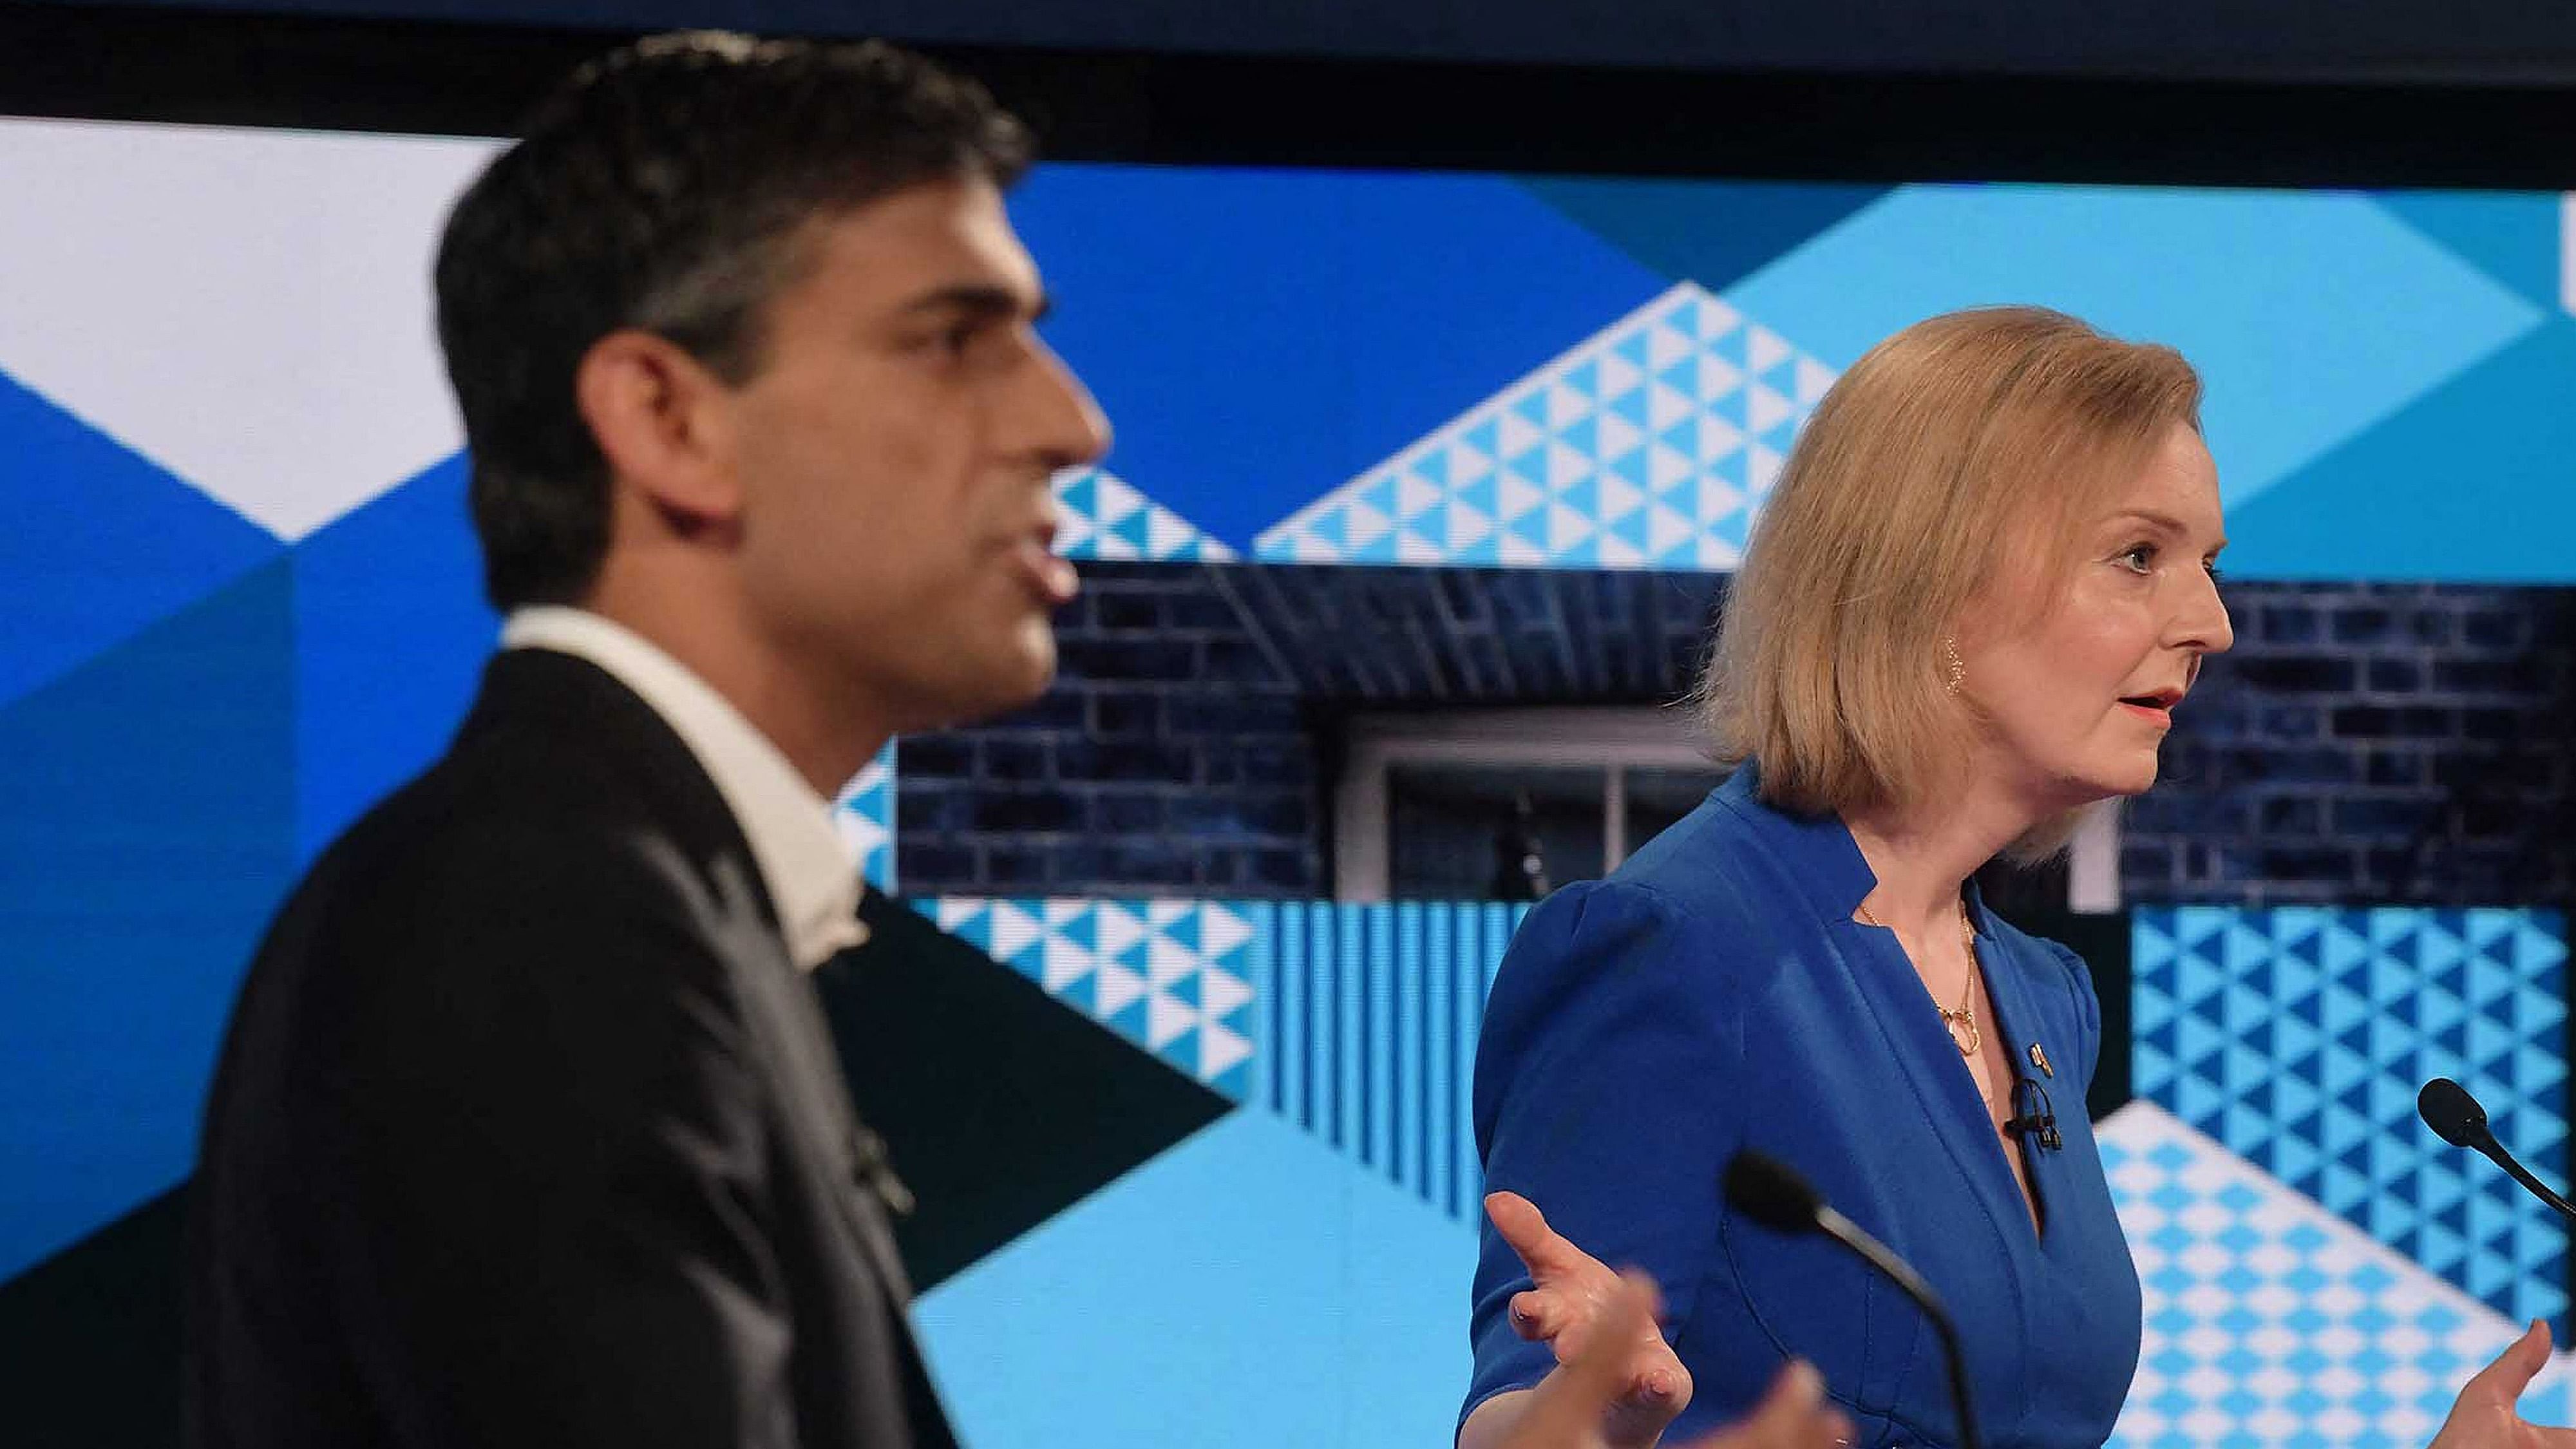 Both Liz Truss and Rishi Sunak served under Boris Johnson and the air of continuity may taint those attempts to revitalise if a positive vision fails to emerge. Credit: AFP Photo